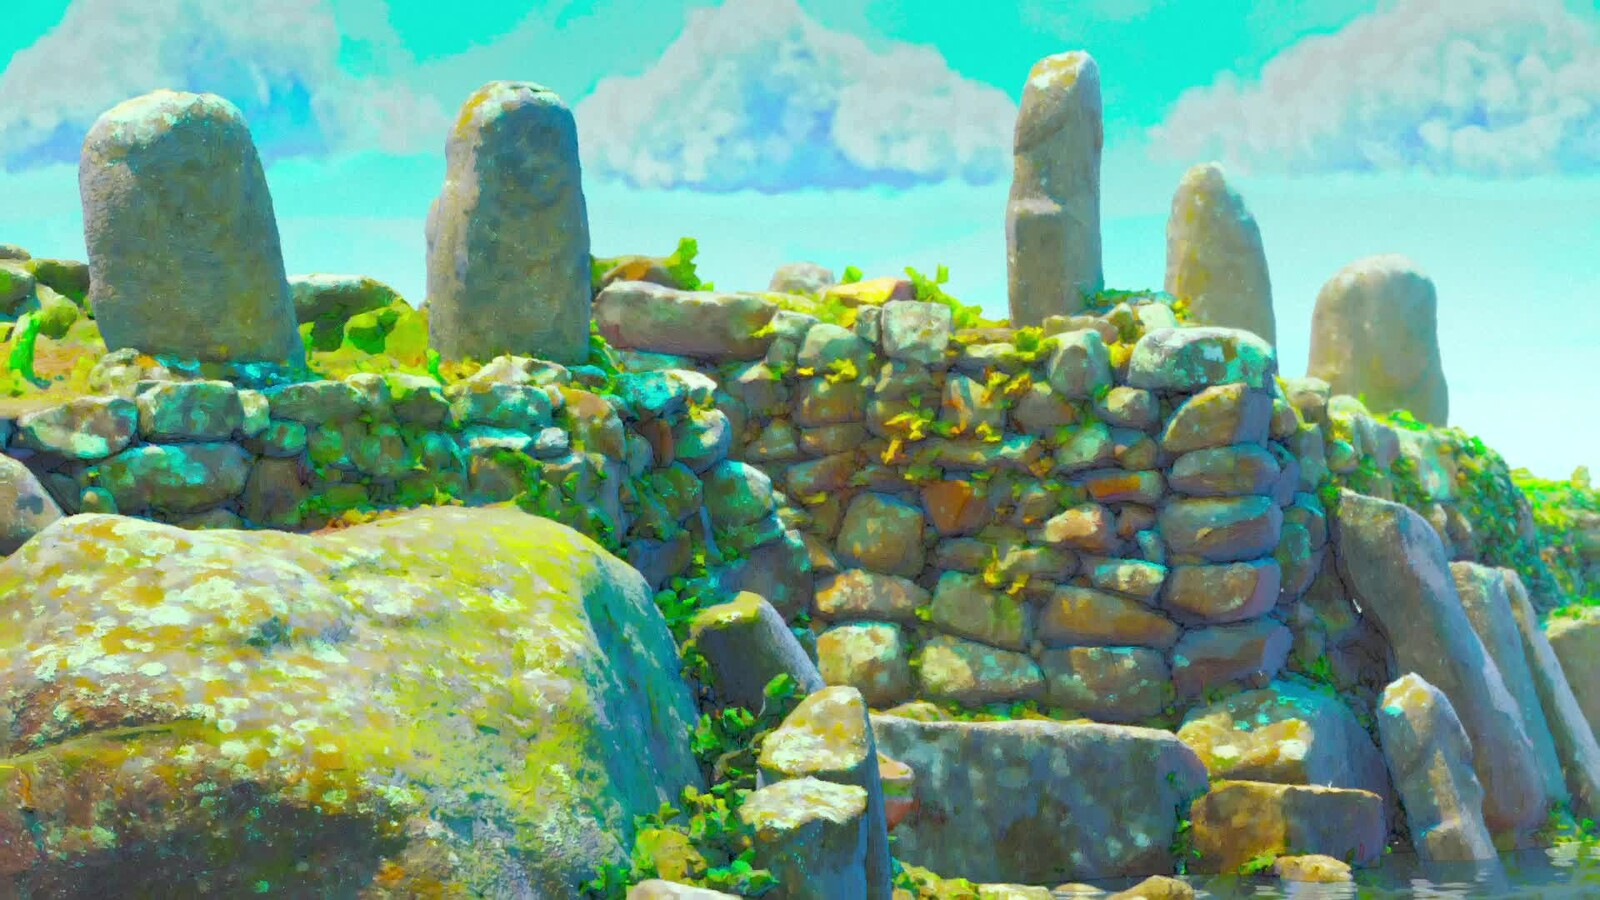 Stone Ruins II - (Stylized 3D Environment Rendering - 2021)